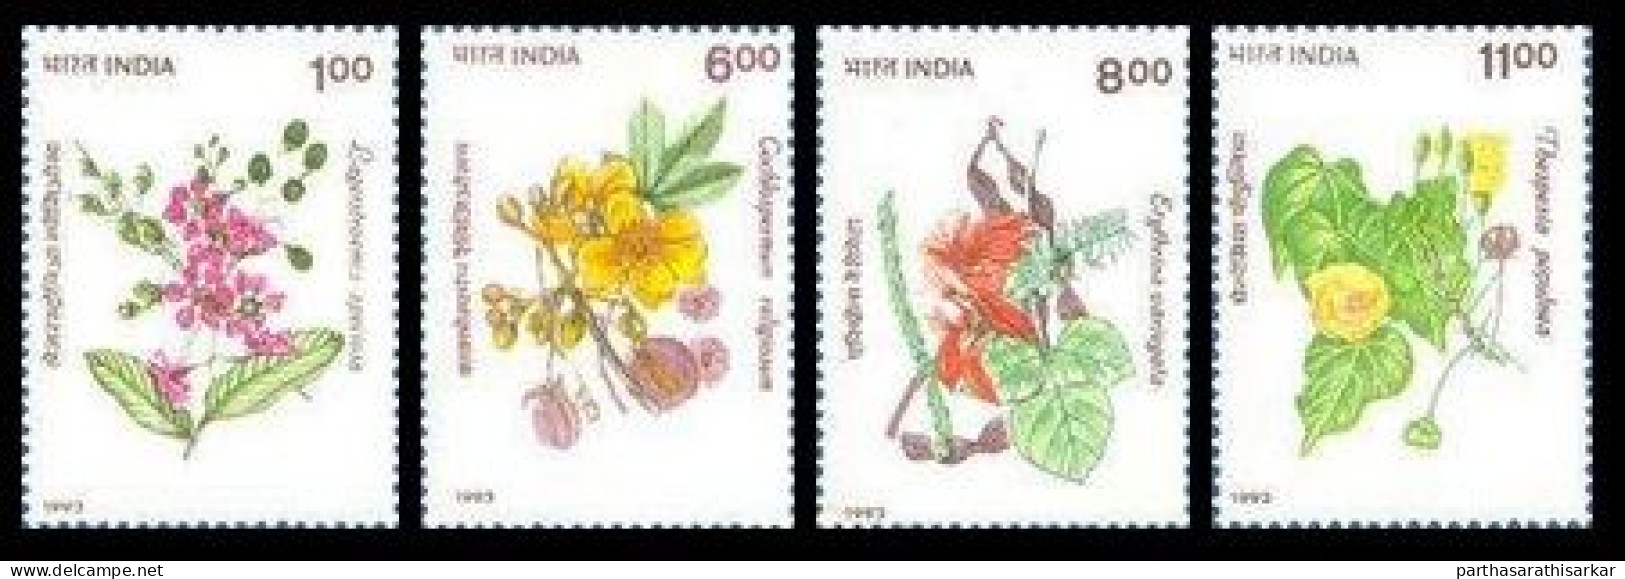 INDIA 1993 FLOWERING TREES NATURE COMPLETE SET MNH - Unused Stamps